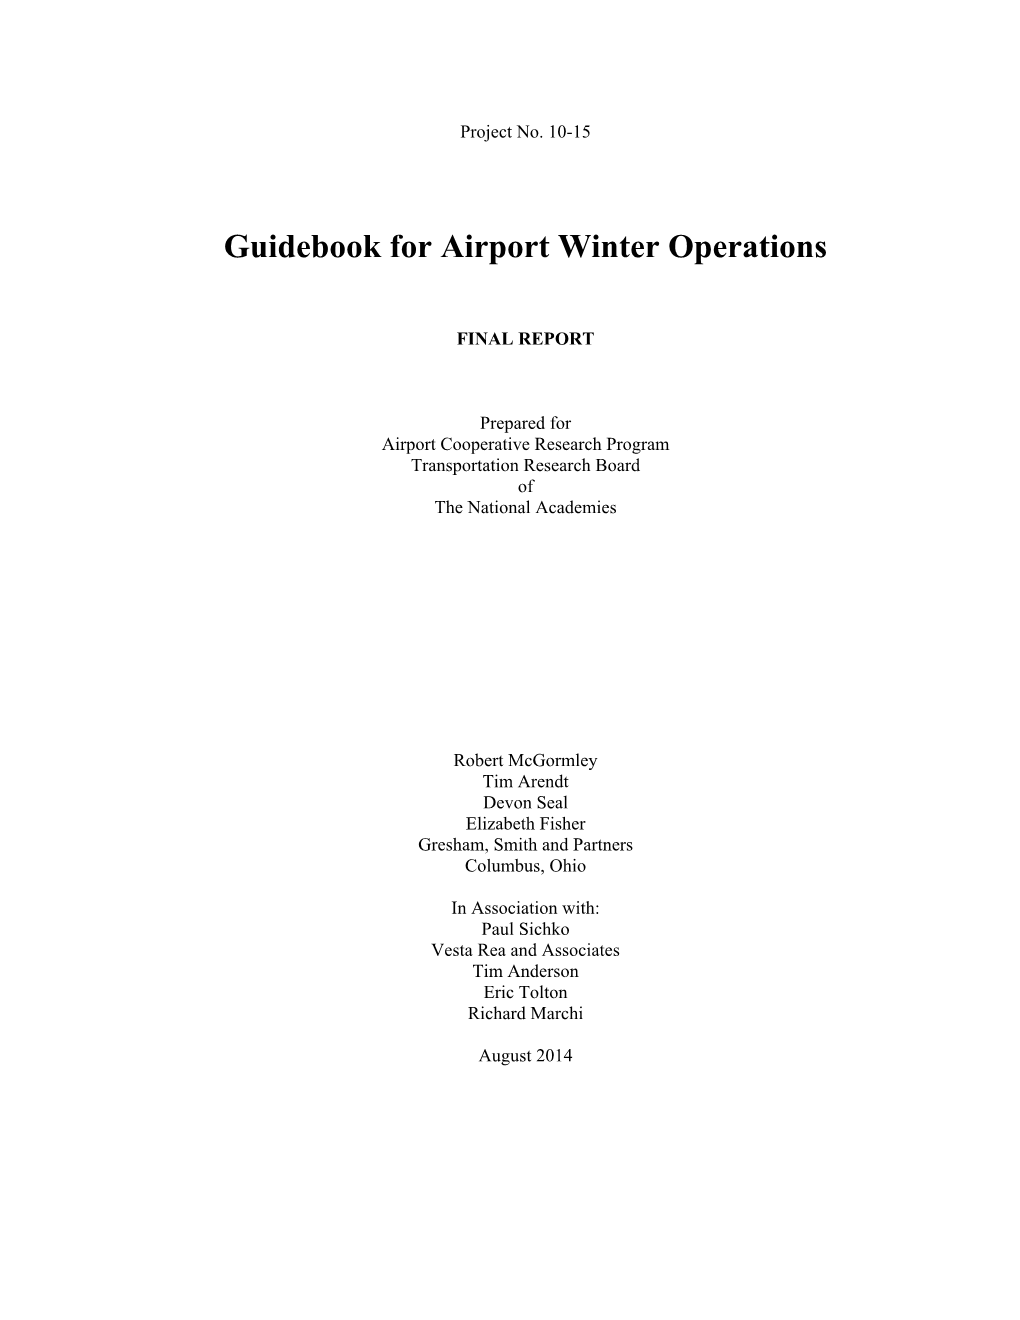 Guidebook for Airport Winter Operations